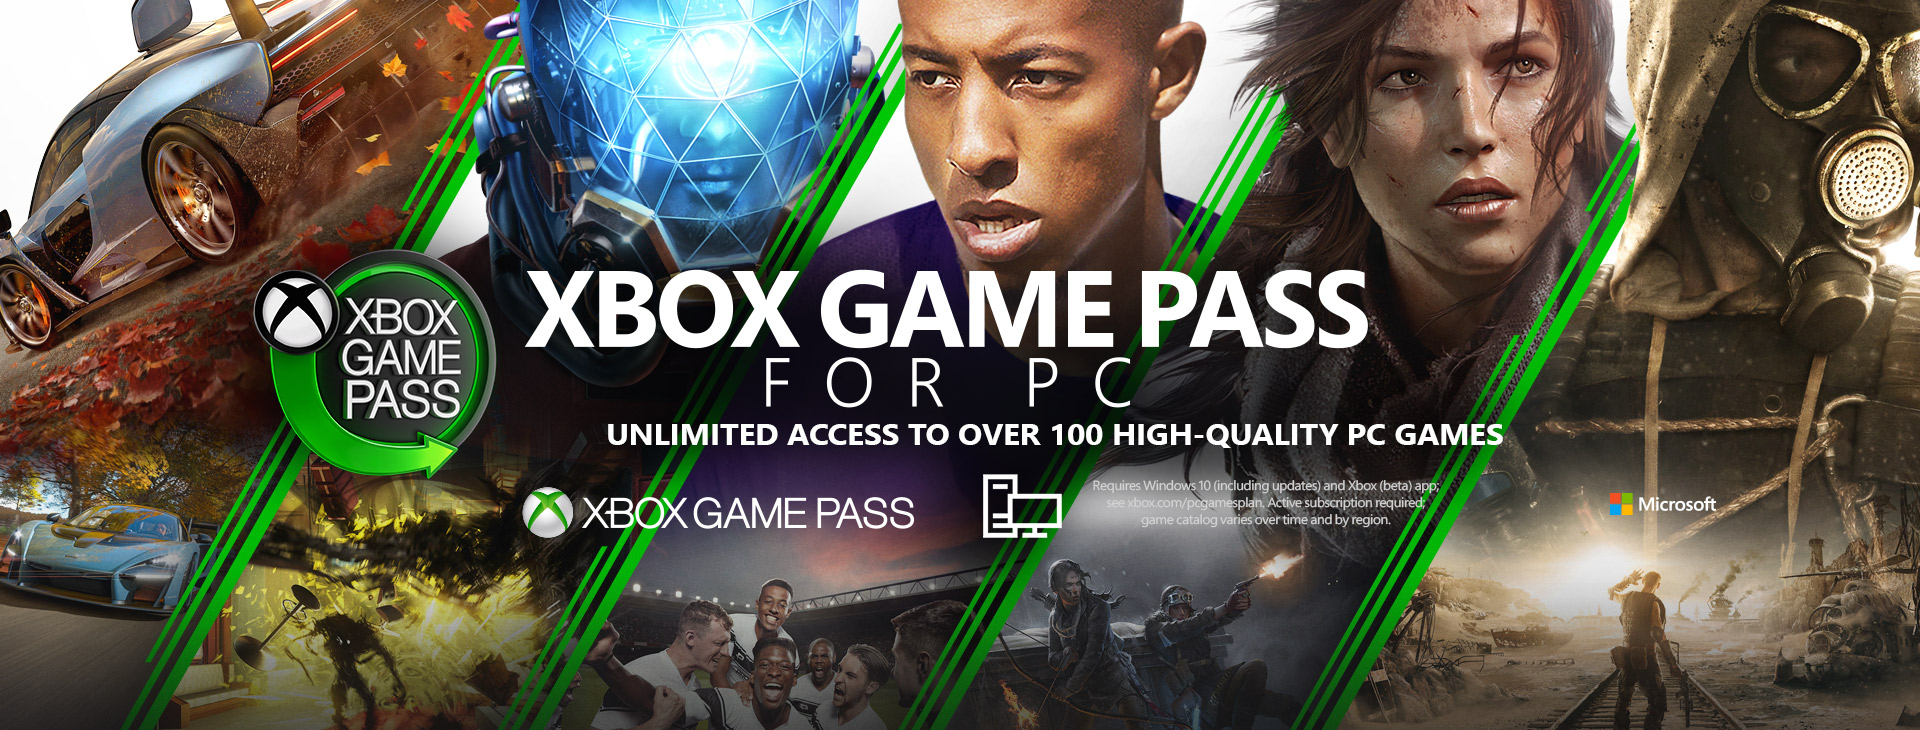 game pass for pc and xbox